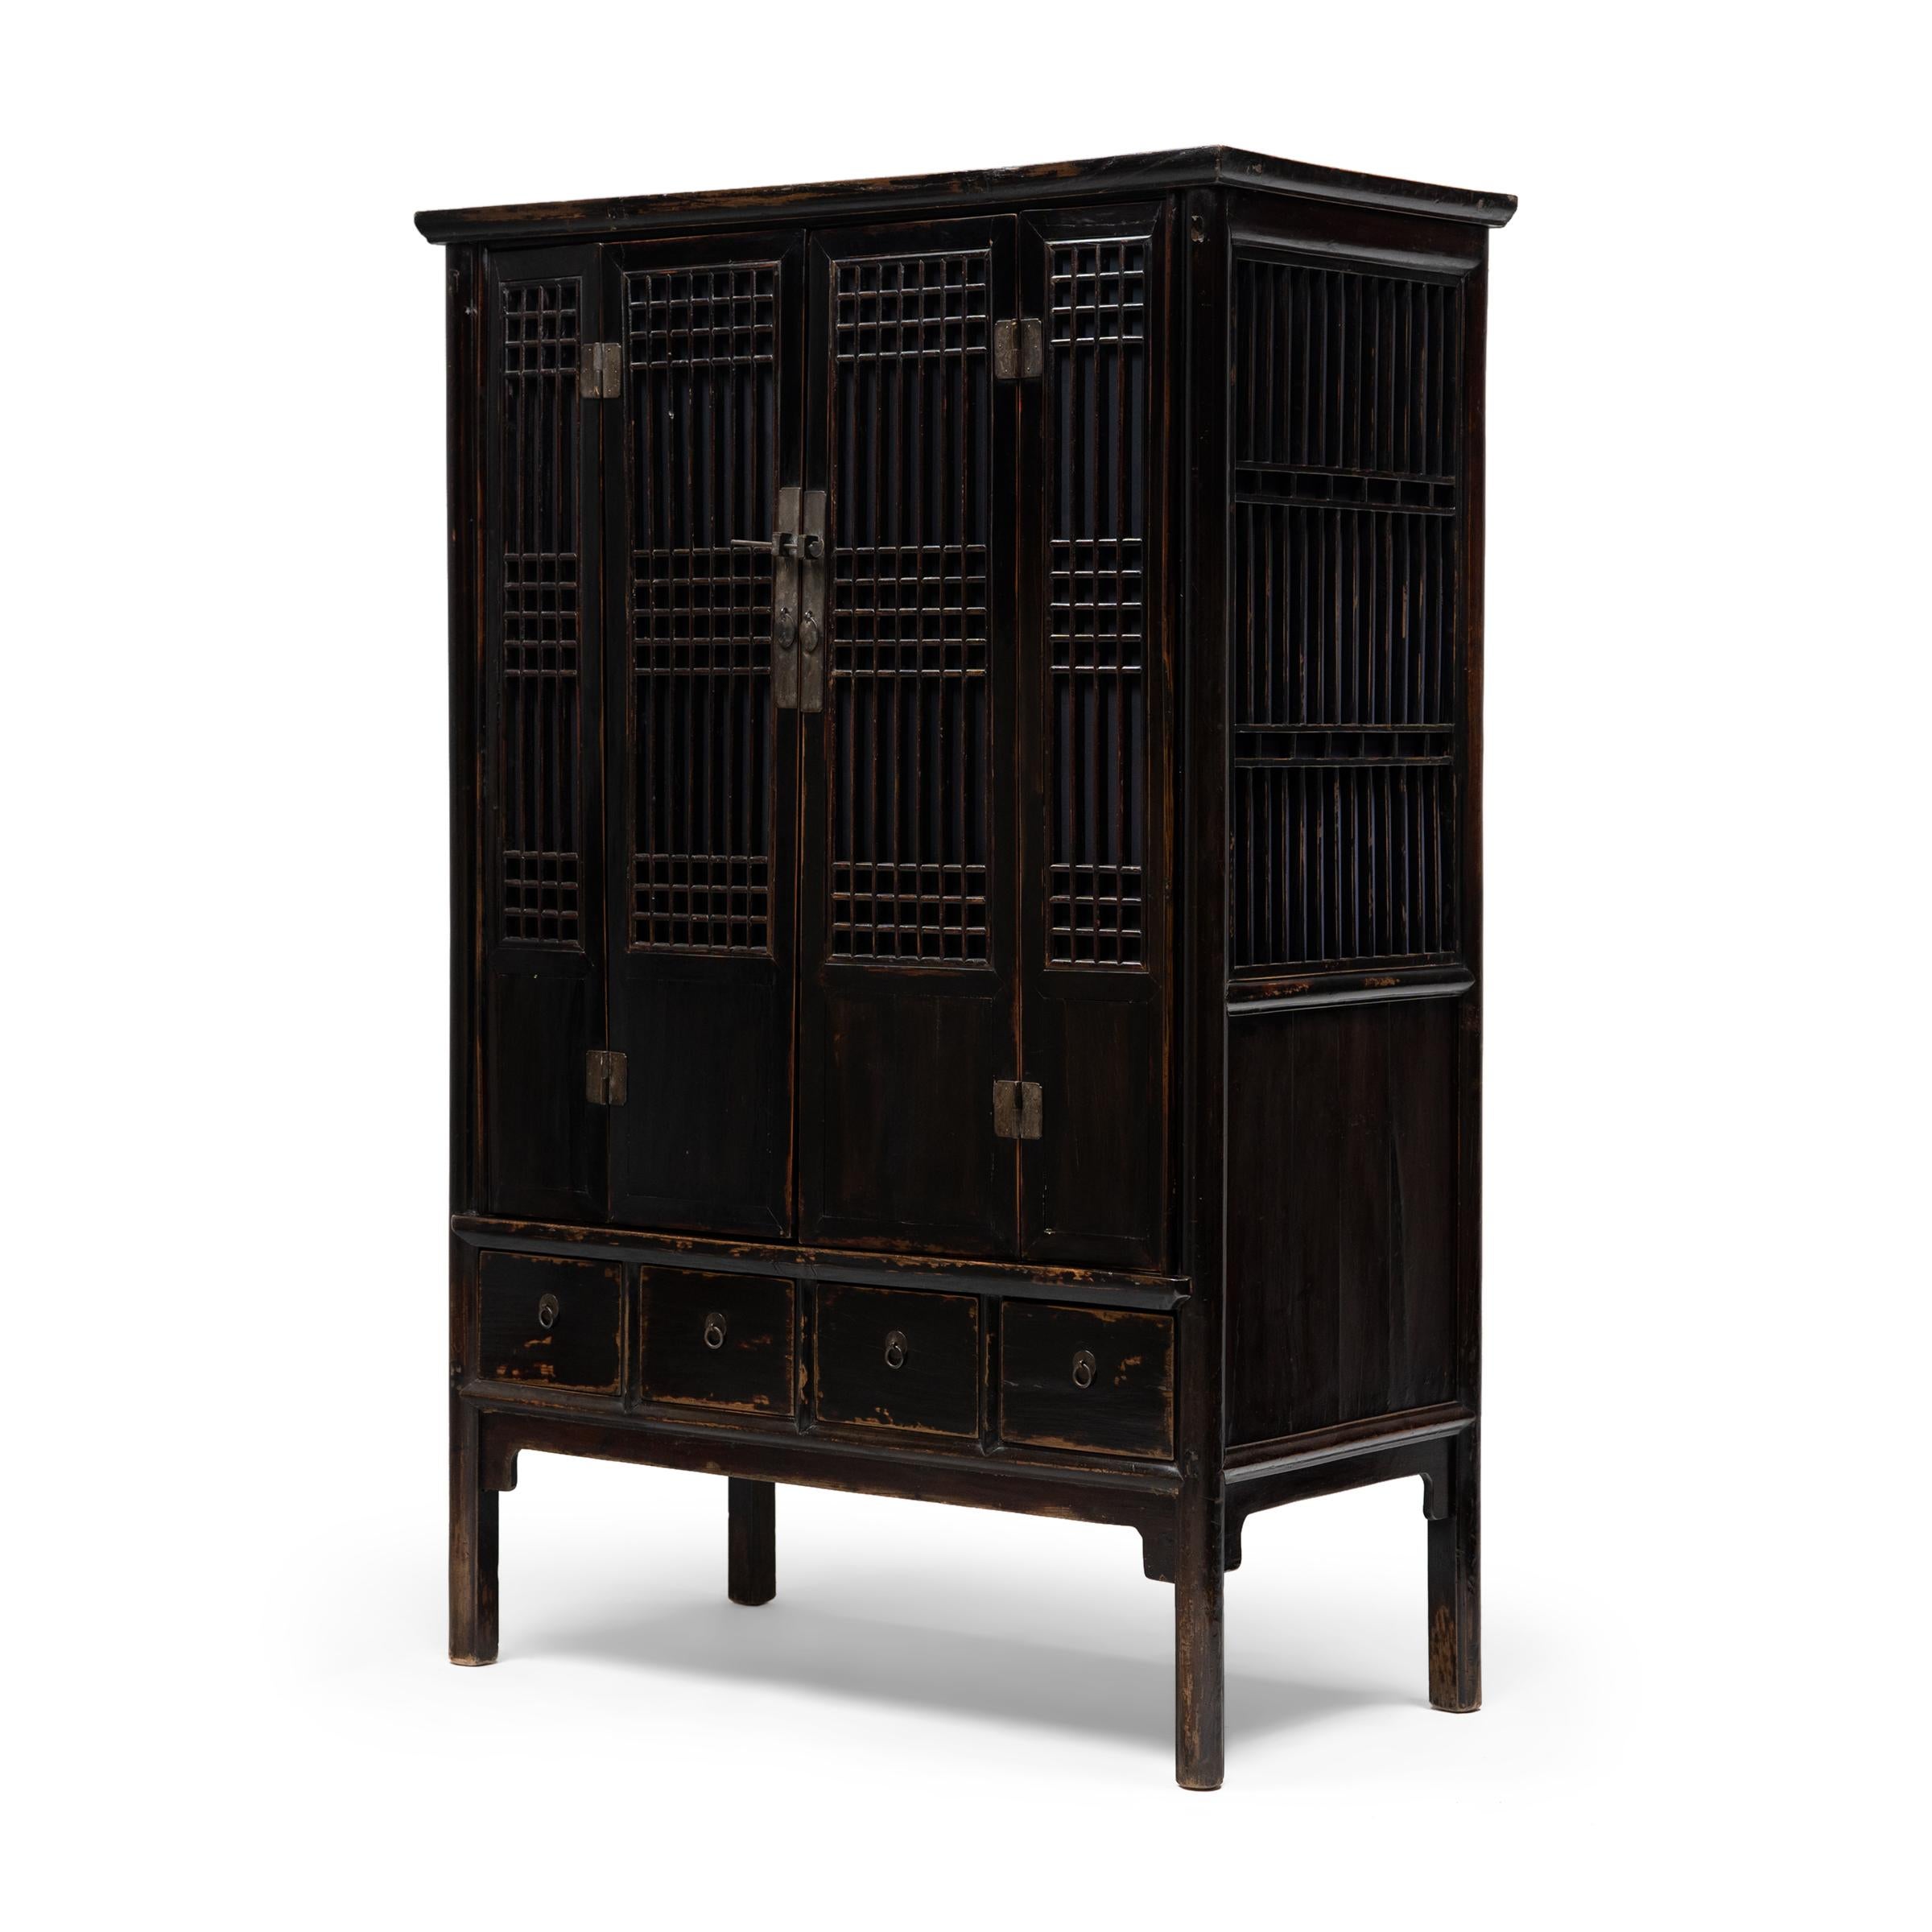 Lacquered Chinese Black Lacquer Lattice Cabinet, c. 1850 For Sale